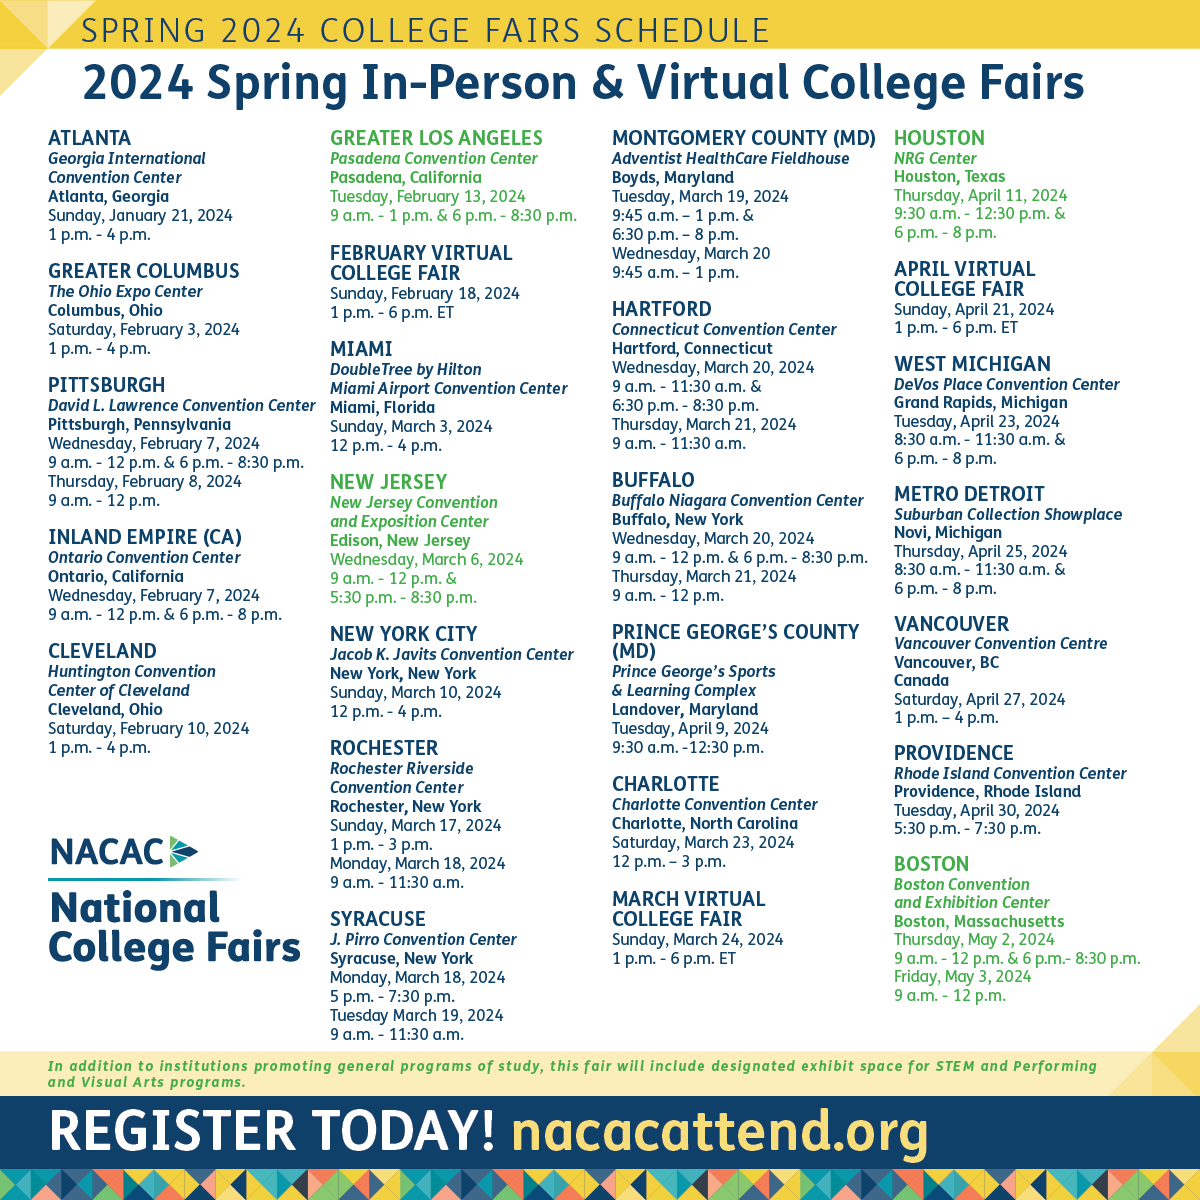 It’s not too late! ⏰ You still have time to attend @NACAC's virtual and in-person college fairs! These events offer opportunities for all students to connect with college representatives and gather insights into admissions processes. bit.ly/4bnKtmG 🌟